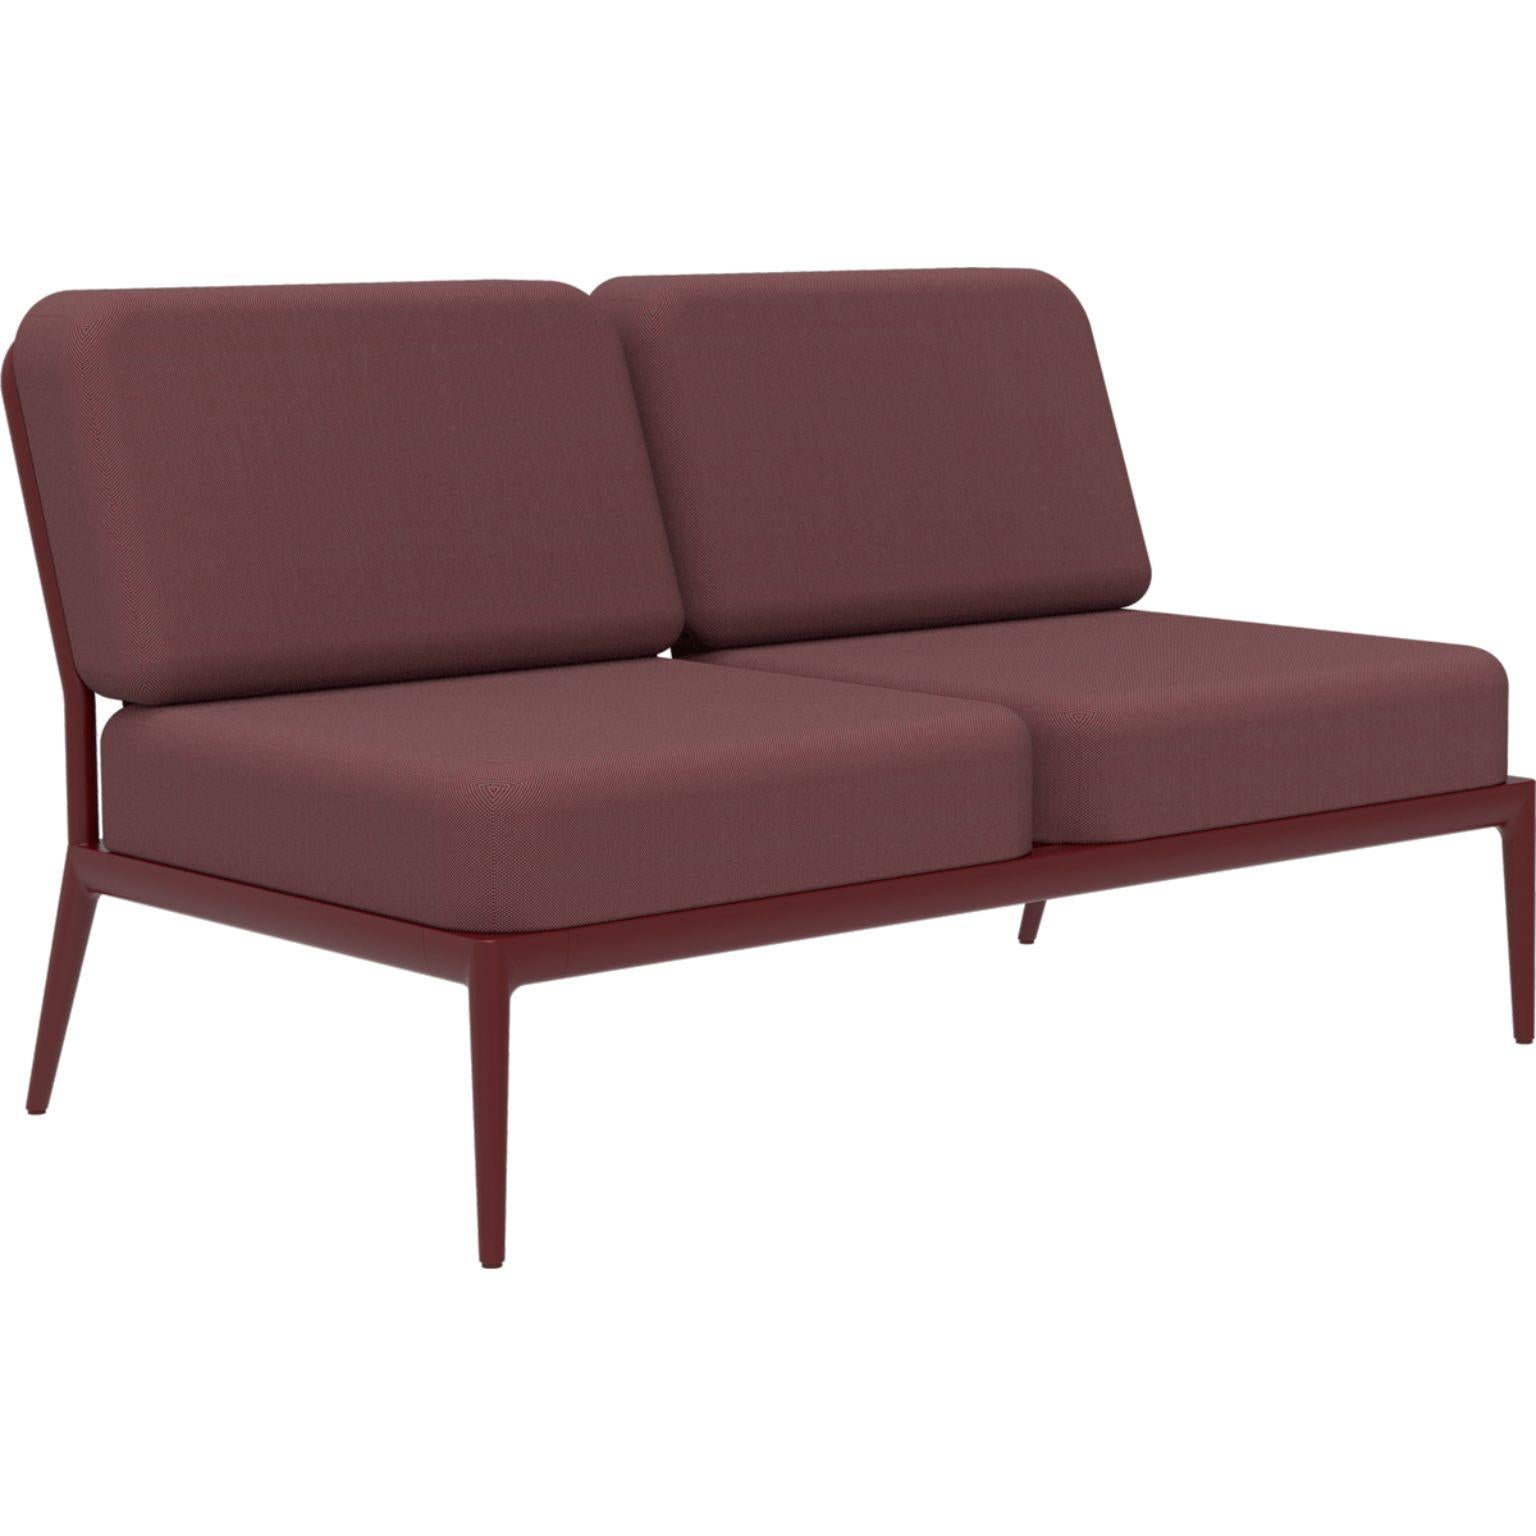 Ribbons burgundy double central modular sofa by MOWEE
Dimensions: D83 x W136 x H81 cm
Material: Aluminium, and upholstery.
Weight: 27 kg.
Also available in different colors and finishes. 

An unmistakable collection for its beauty and